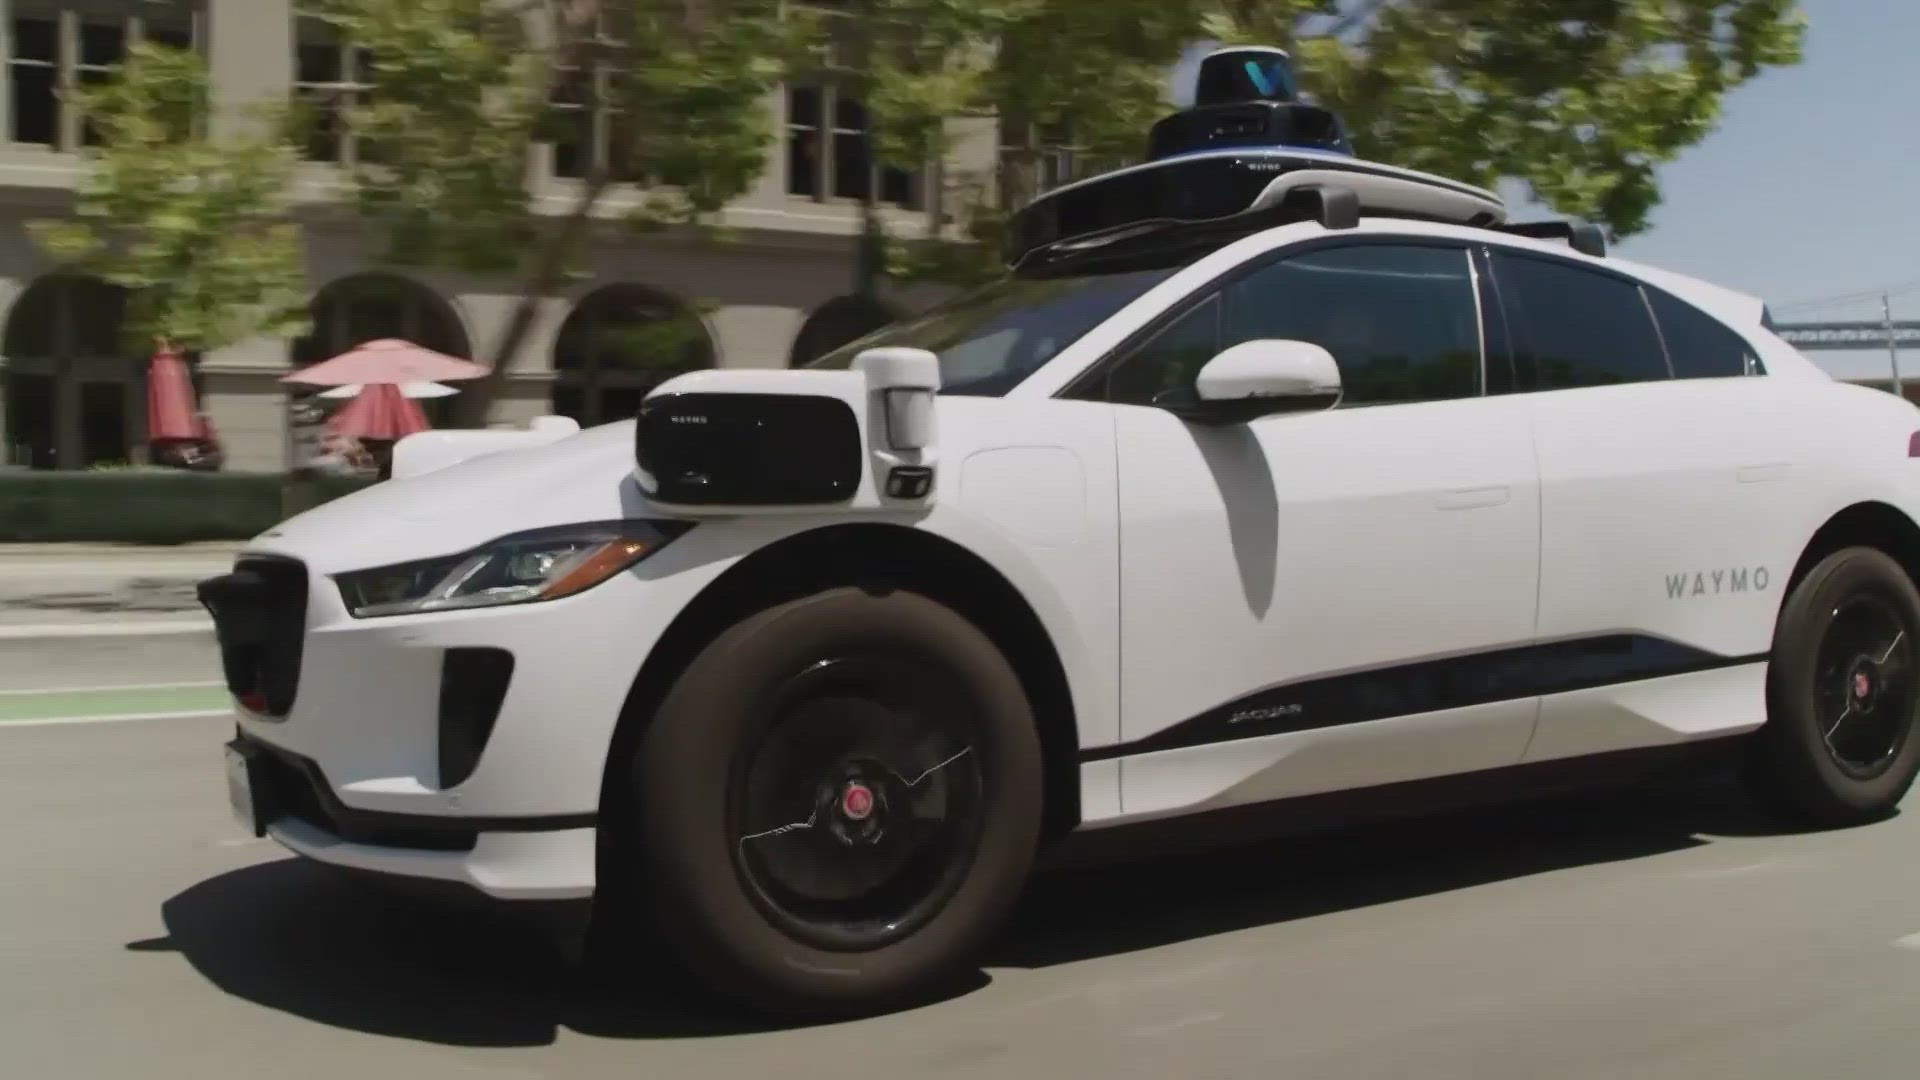 Waymo has been operating in several cities.